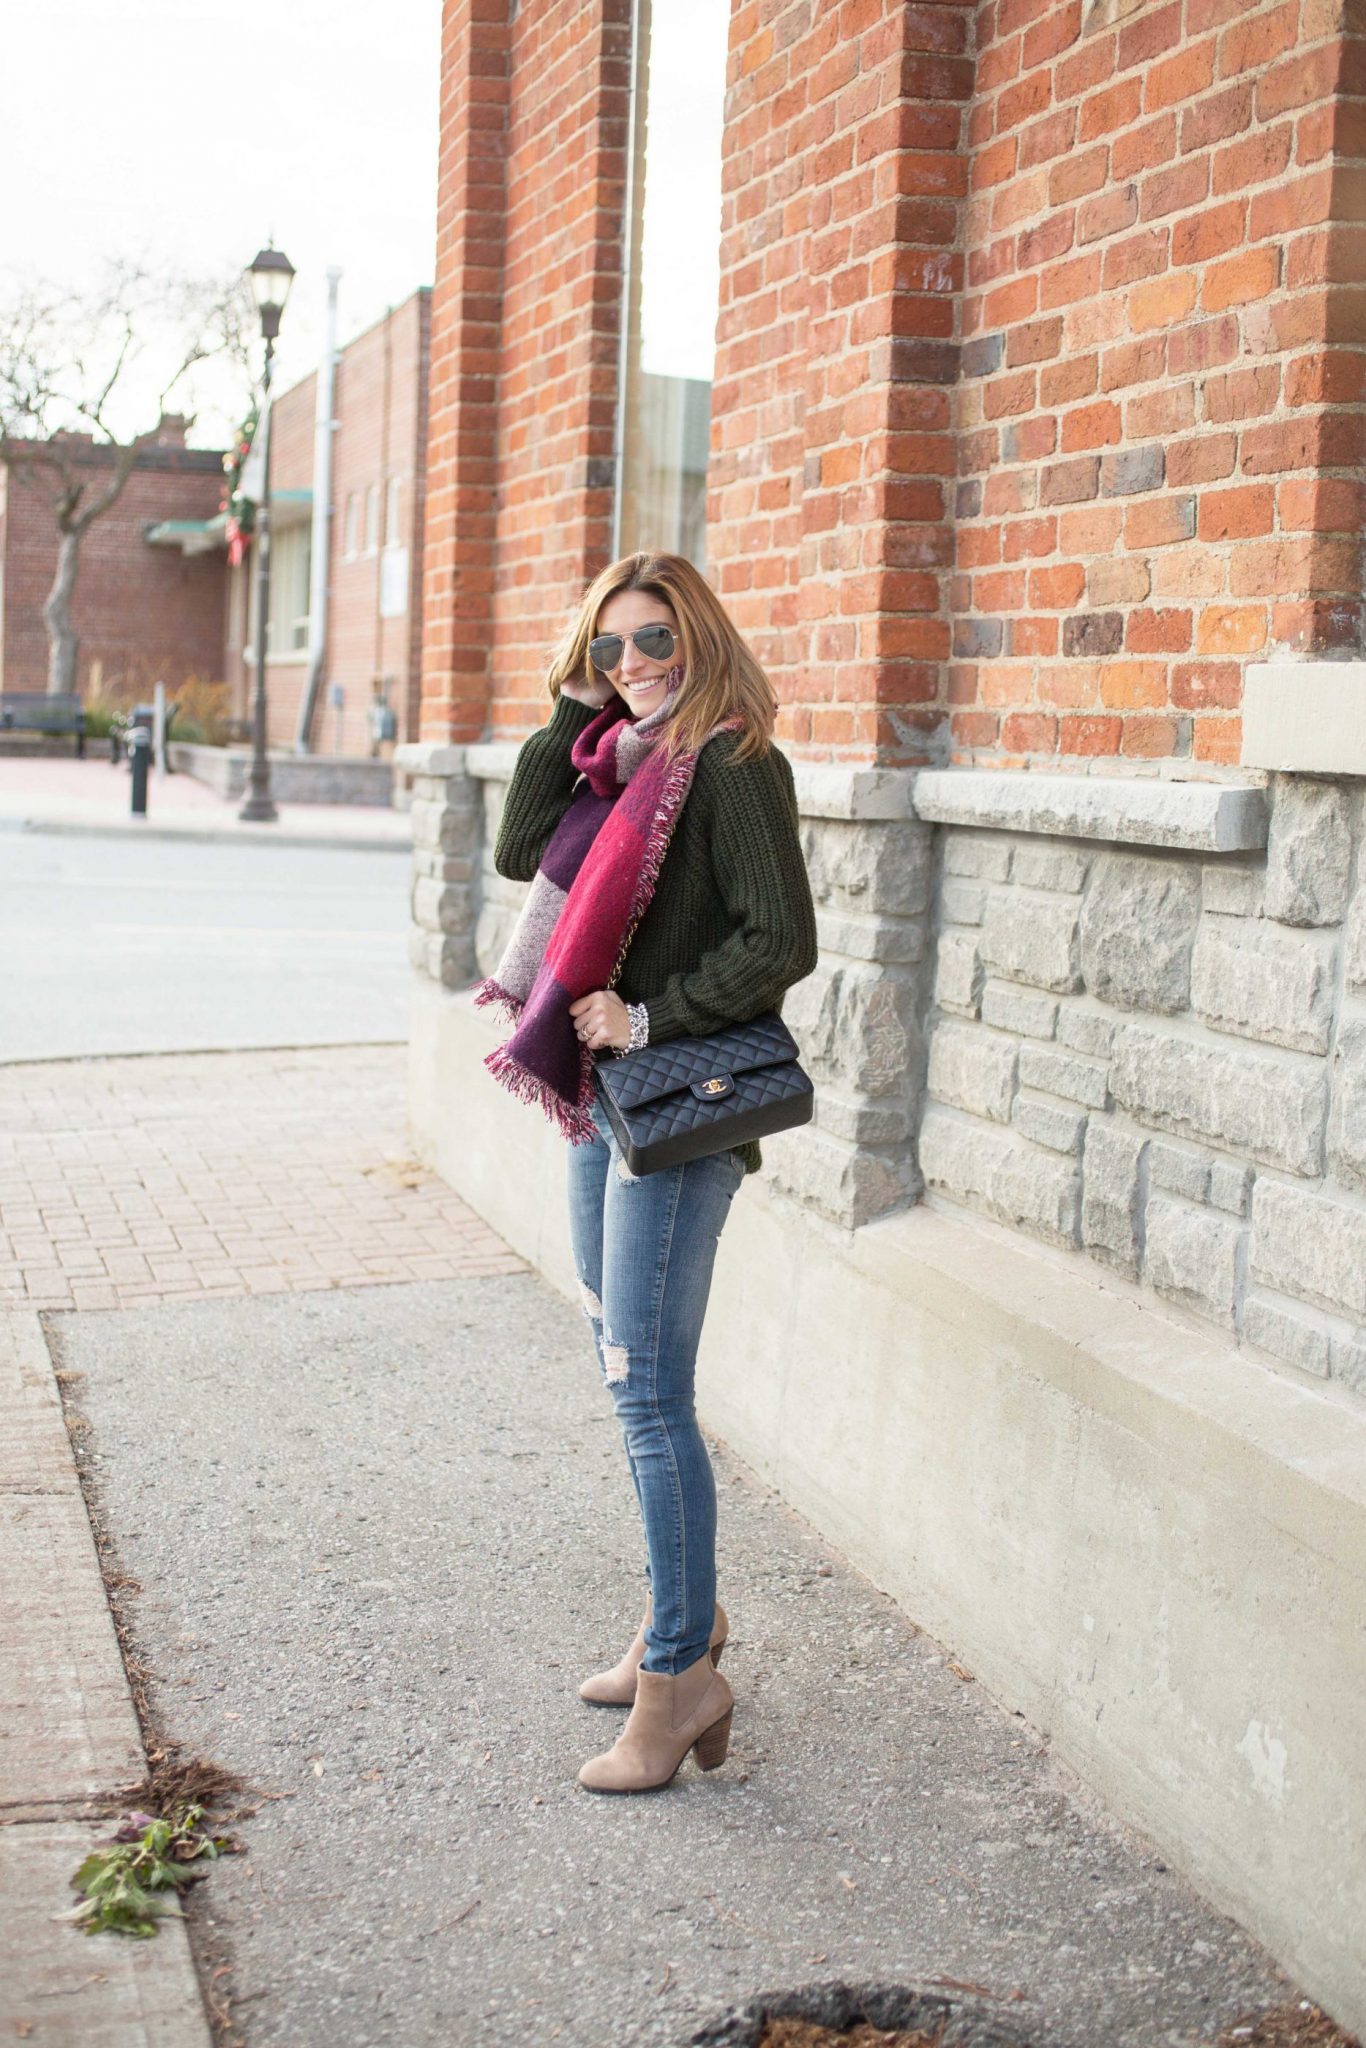 Oversized scarf with cable-knit sweater distressed jeans and Chanel bag